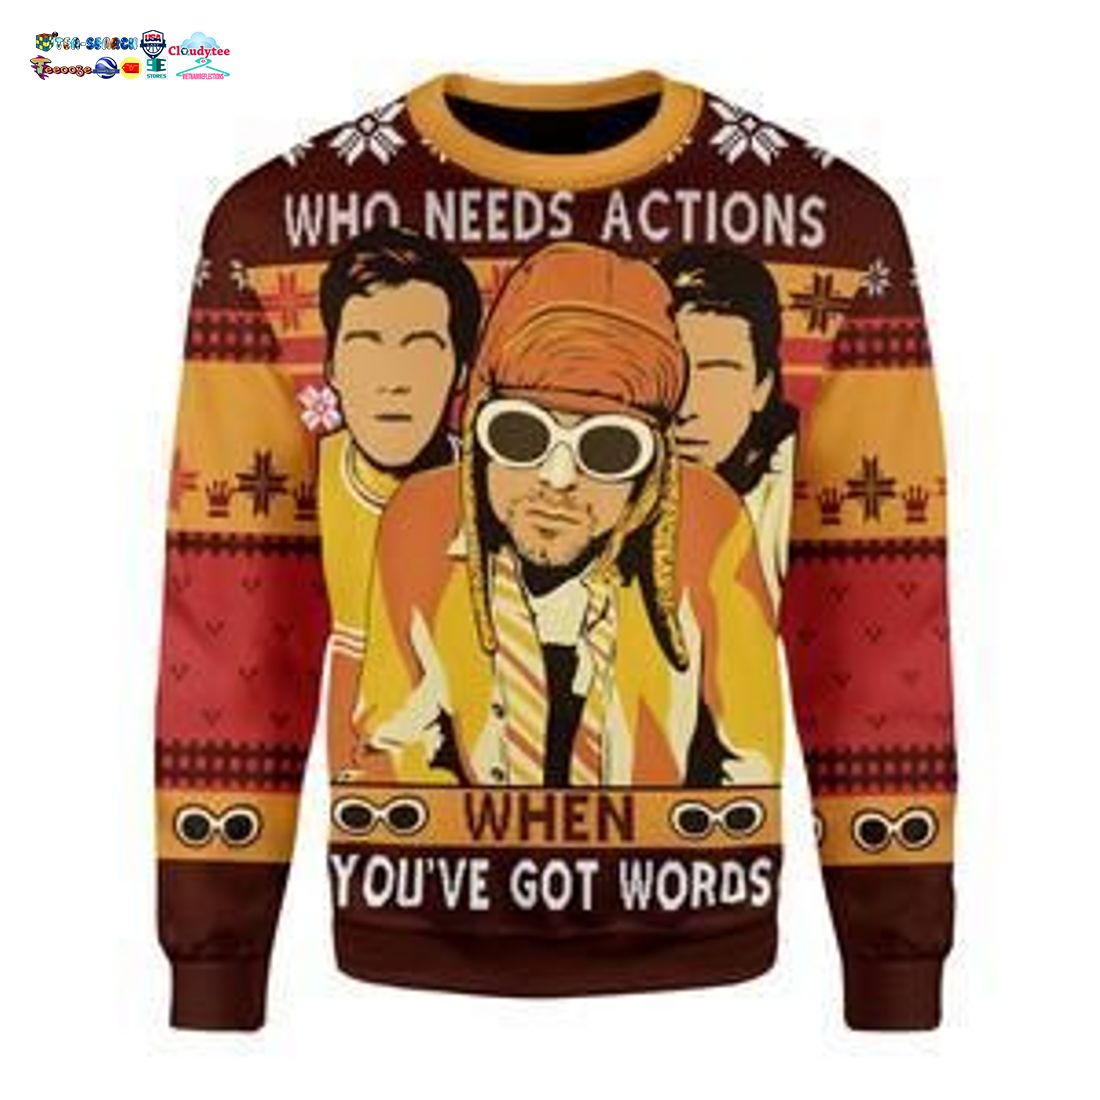 nirvana-who-needs-actions-when-youve-got-words-ugly-christmas-sweater-1-hiUAW.jpg